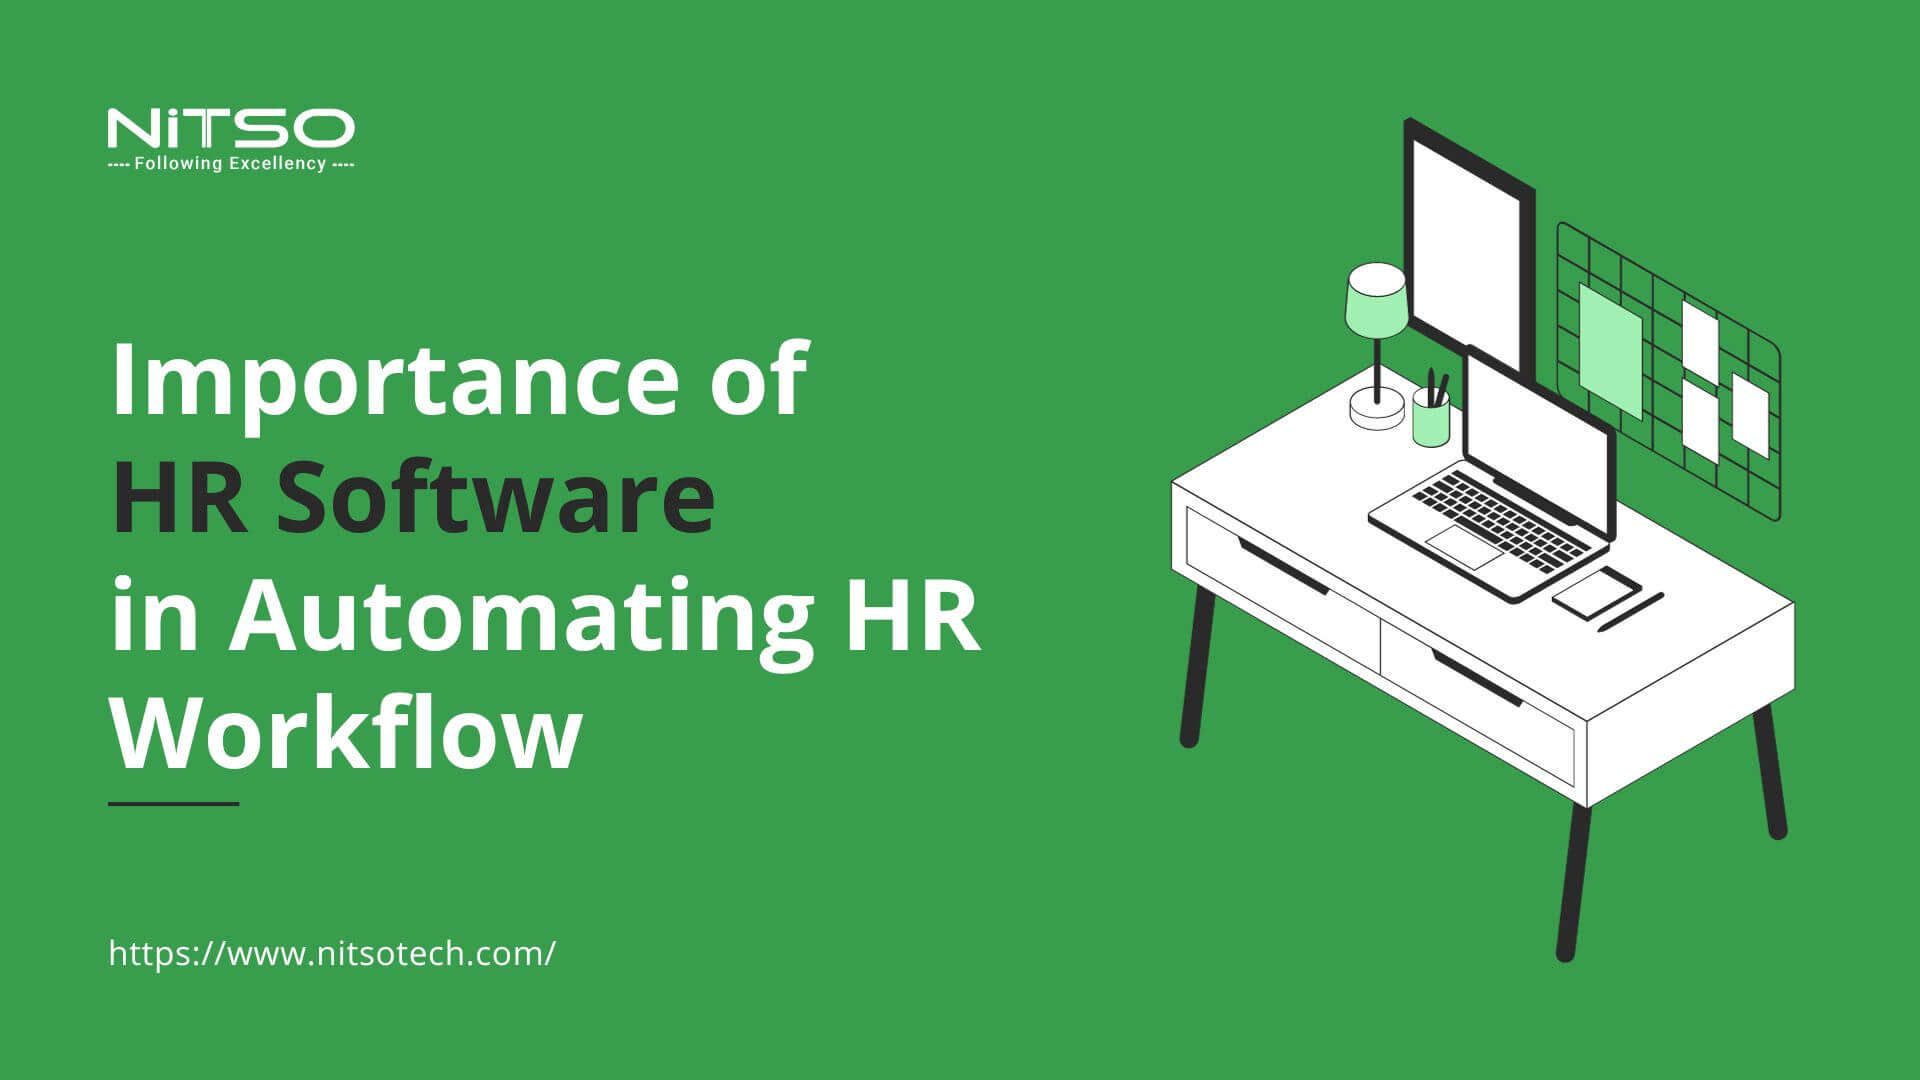 Importance of HR Software in Automating HR Workflow